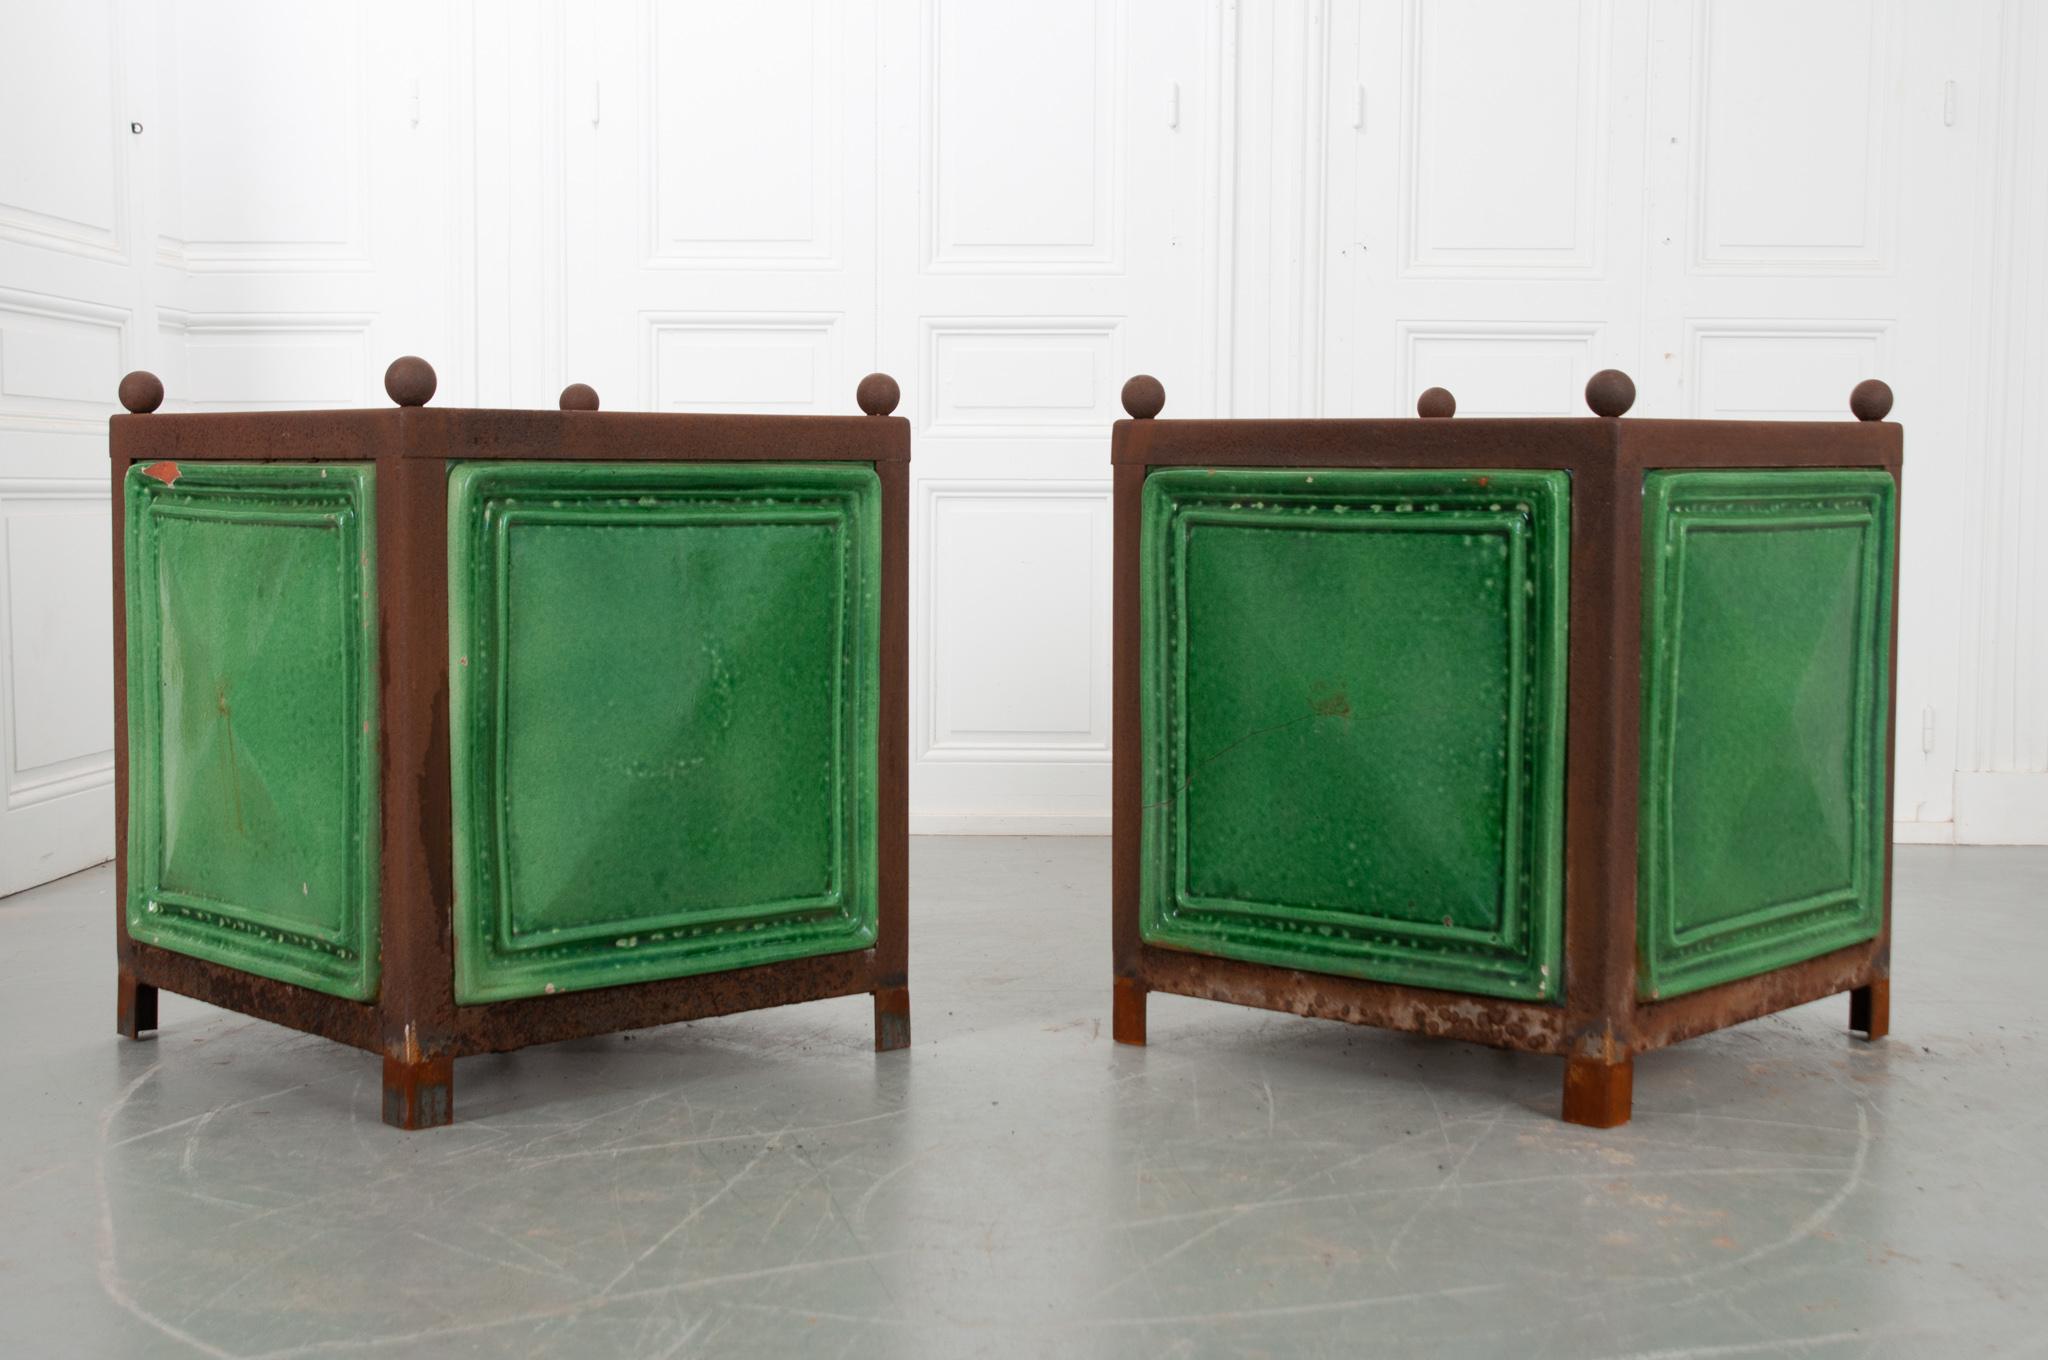 An eye-catching vintage pair of planters made of sturdy metal and green glazed terracotta.The design is a direct influence from the citrus gardens in Versailles. To protect the orange trees from harsh winters, a transportable planter was invented to